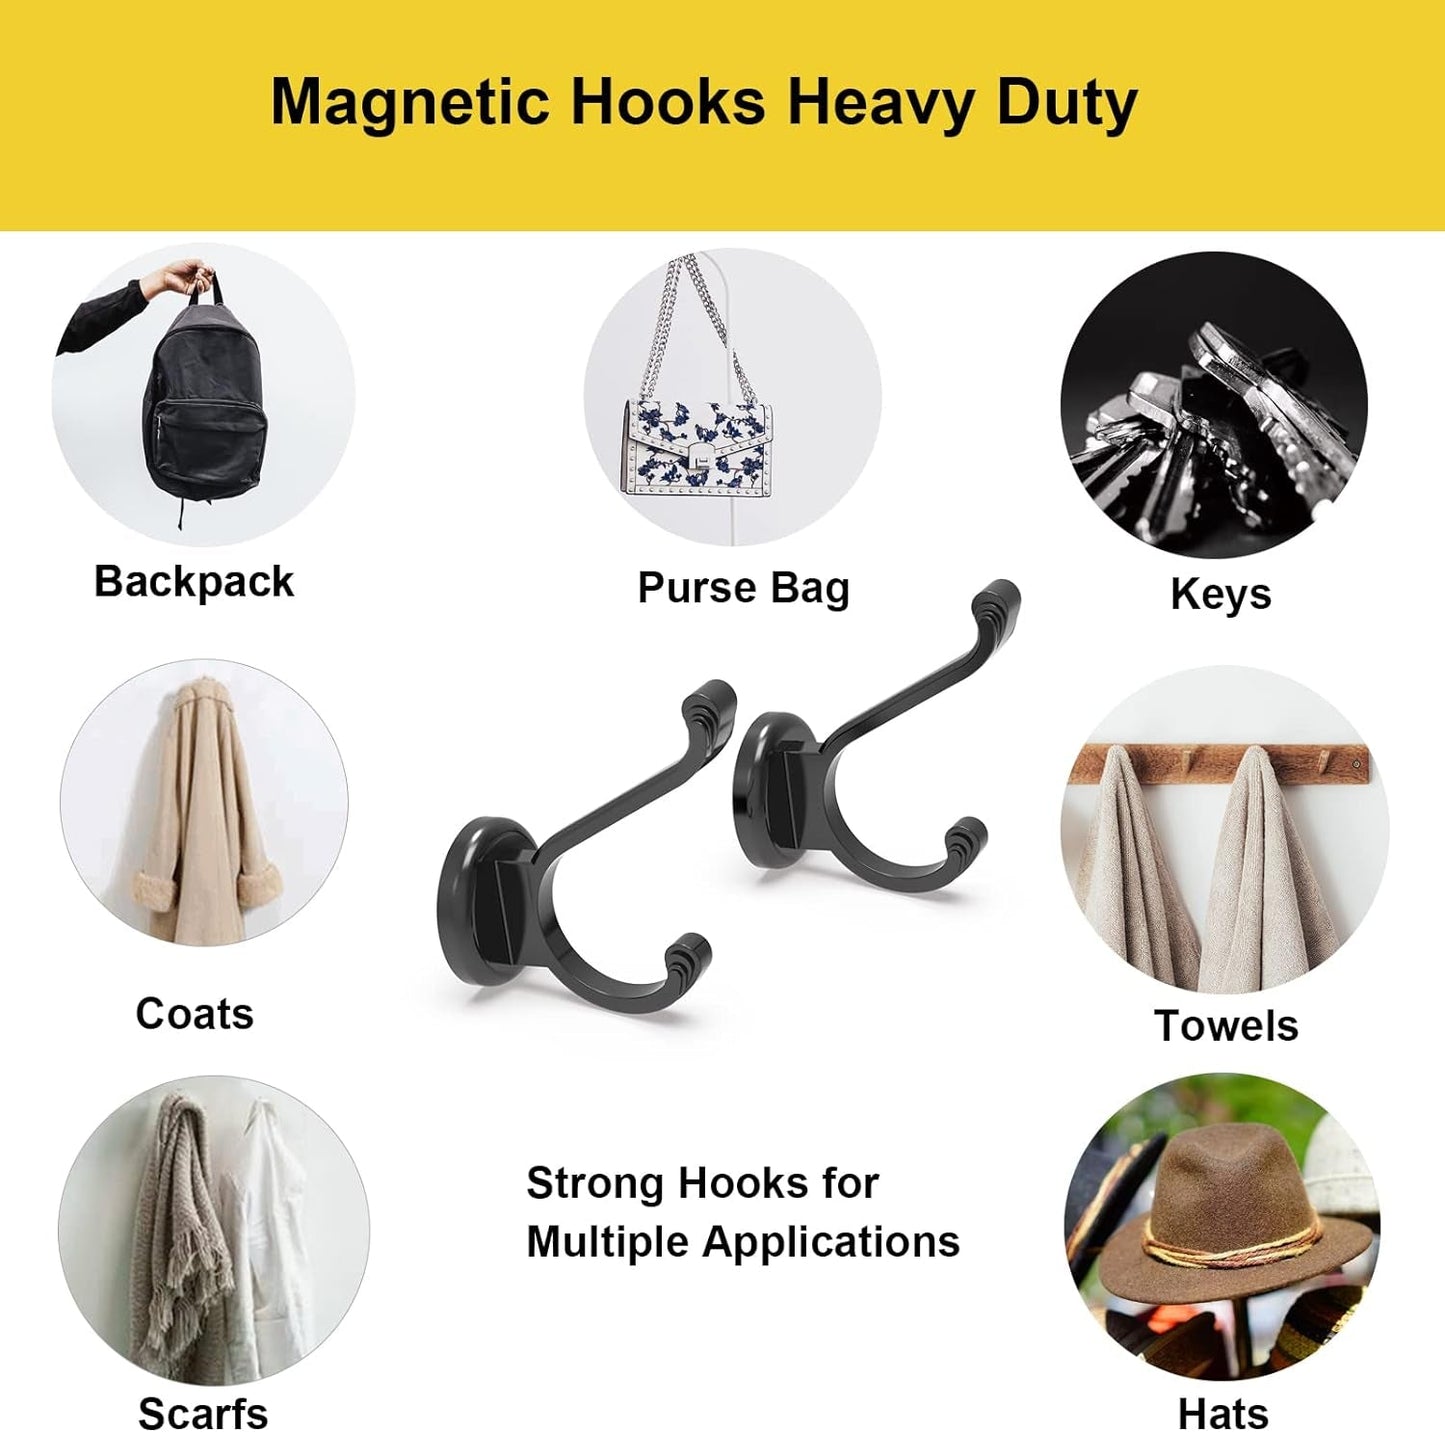 Ant Mag Magnetic Hooks Heavy Duty 140Lbs Neodymium Magnet Wall Hooks for Hanging Coats Robes Backpacks Bags Hats Keys Mugs Cups Towels